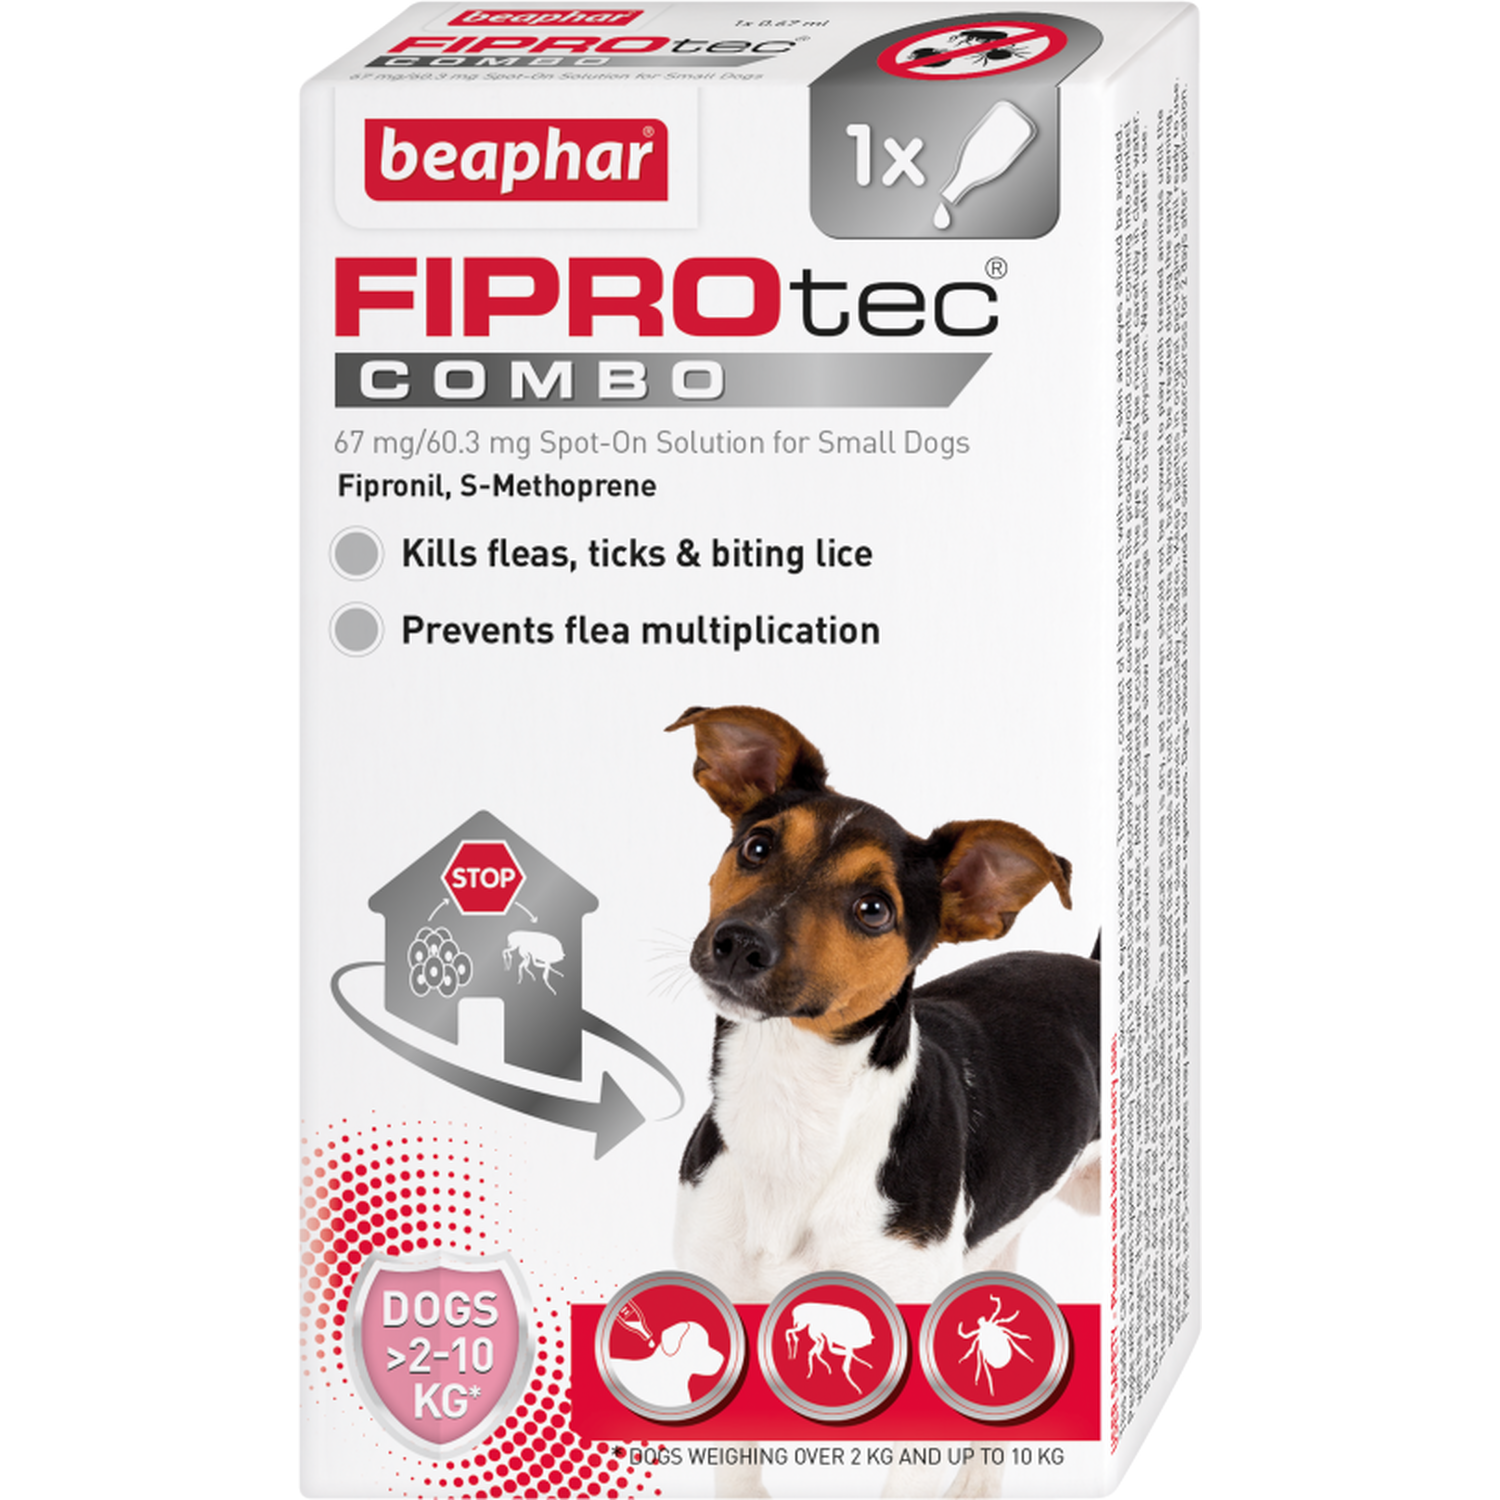 FIPROtec Combo Spot On for Dogs - Small Breed Image